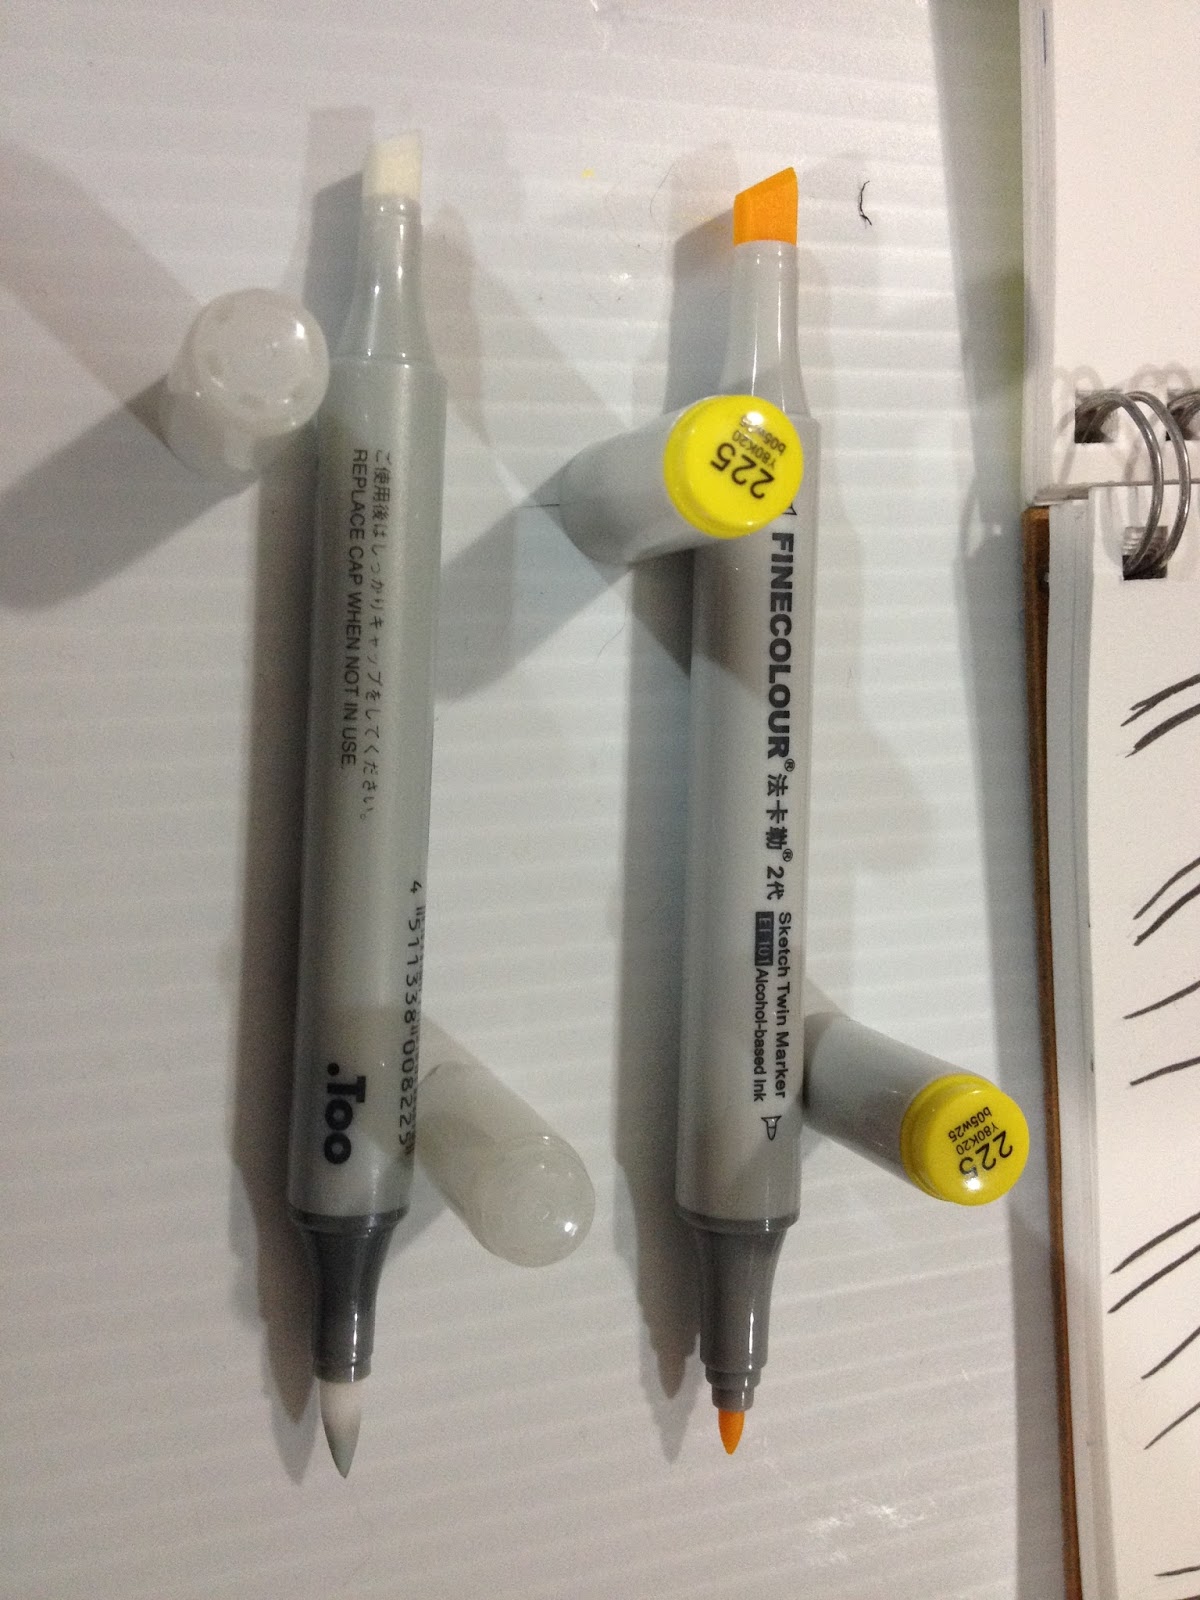 Alcohol Marker Review: Finecolour Sketch Alcohol Markers